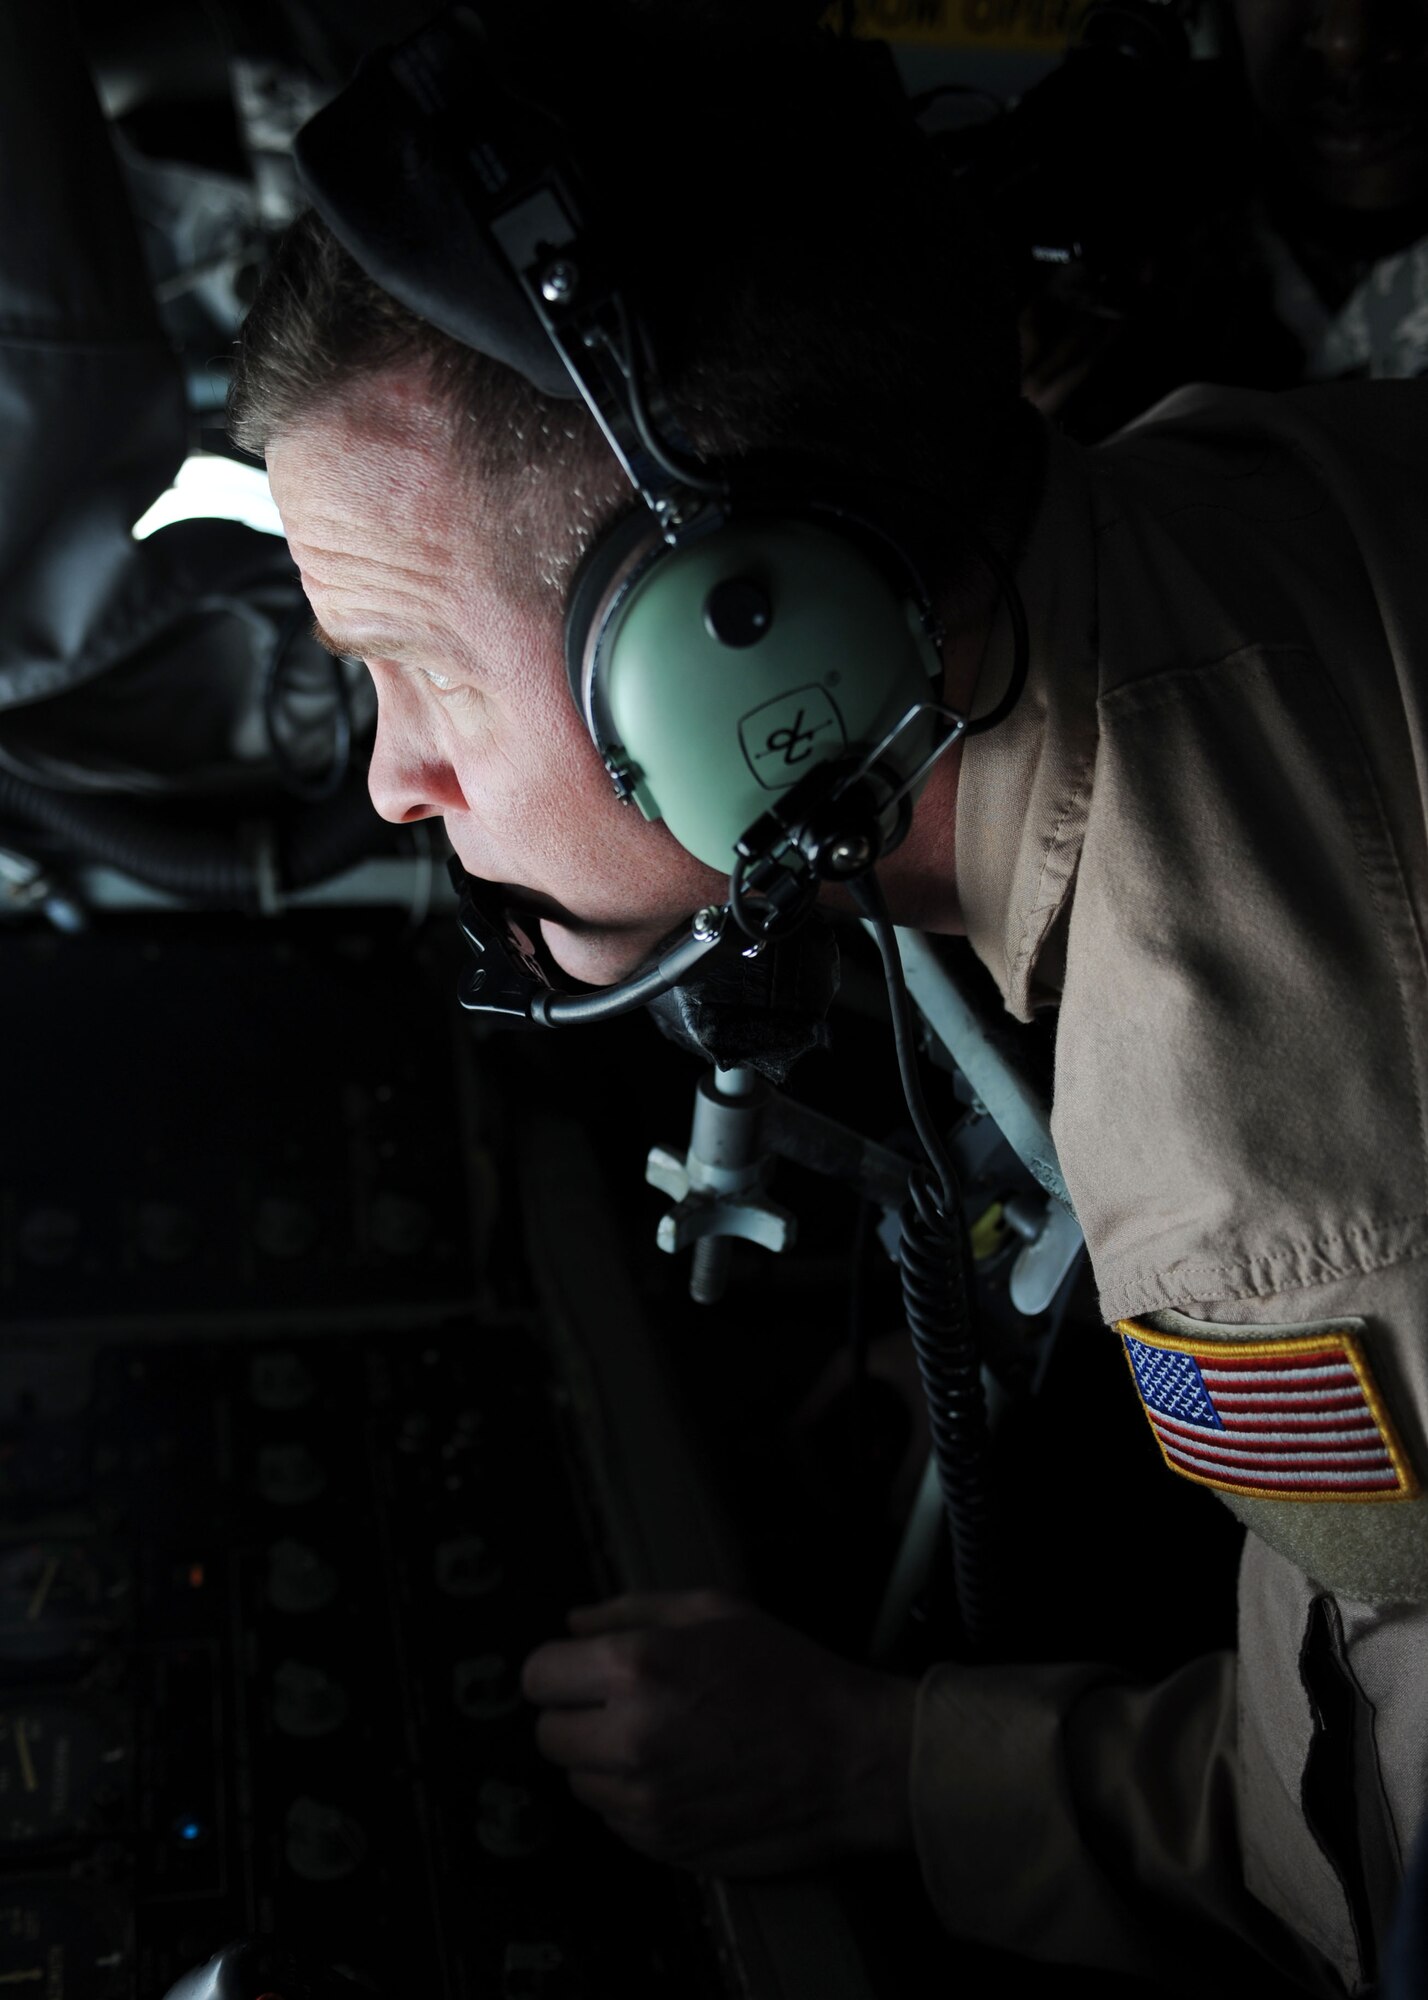 Senior Master Sgt. Todd Daniels, 22nd Expeditionary Air Refueling Squadron aerial refueler, off-loads fuel to a U.S. Navy EA-6B Prowler from the back of a KC-135 Stratotanker over Afghanistan April 10, 2010. The day of April 10 made 22nd EARS history when an air crew logged the 16,000th sortie. (U.S. Air Force photo/Senior Airman Nichelle Anderson/released)